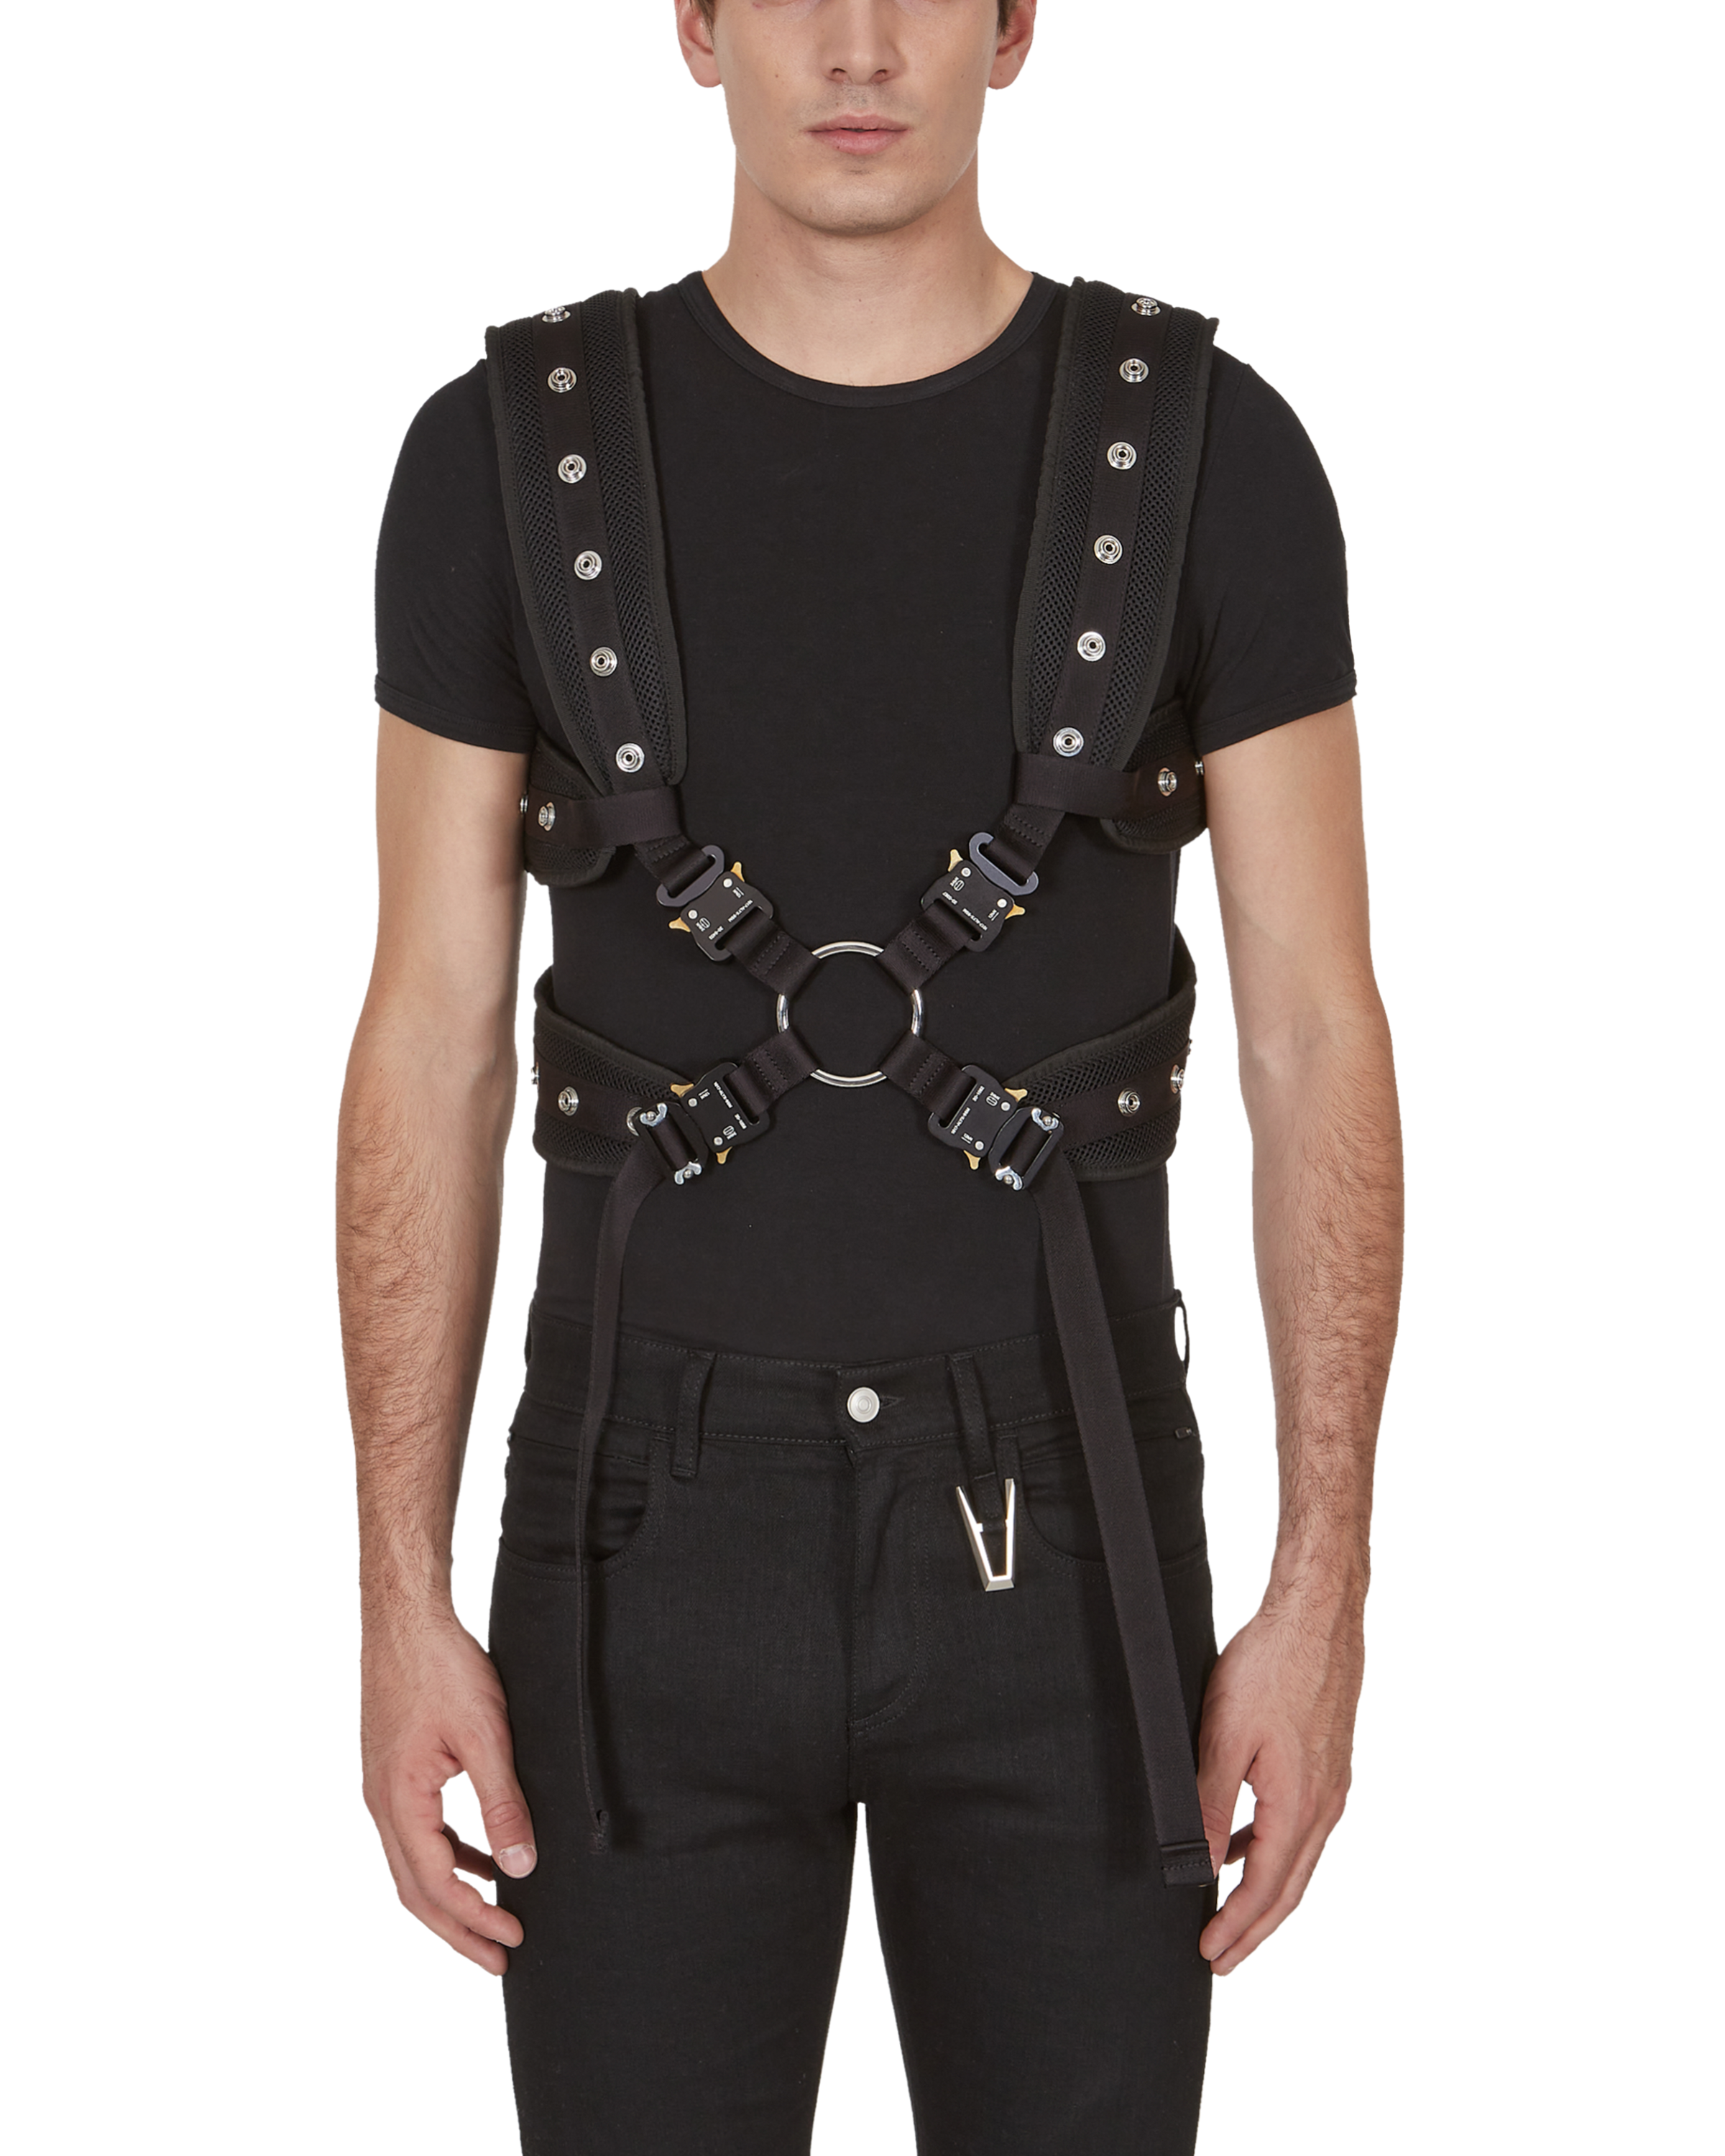 RING BUCKLE HARNESS